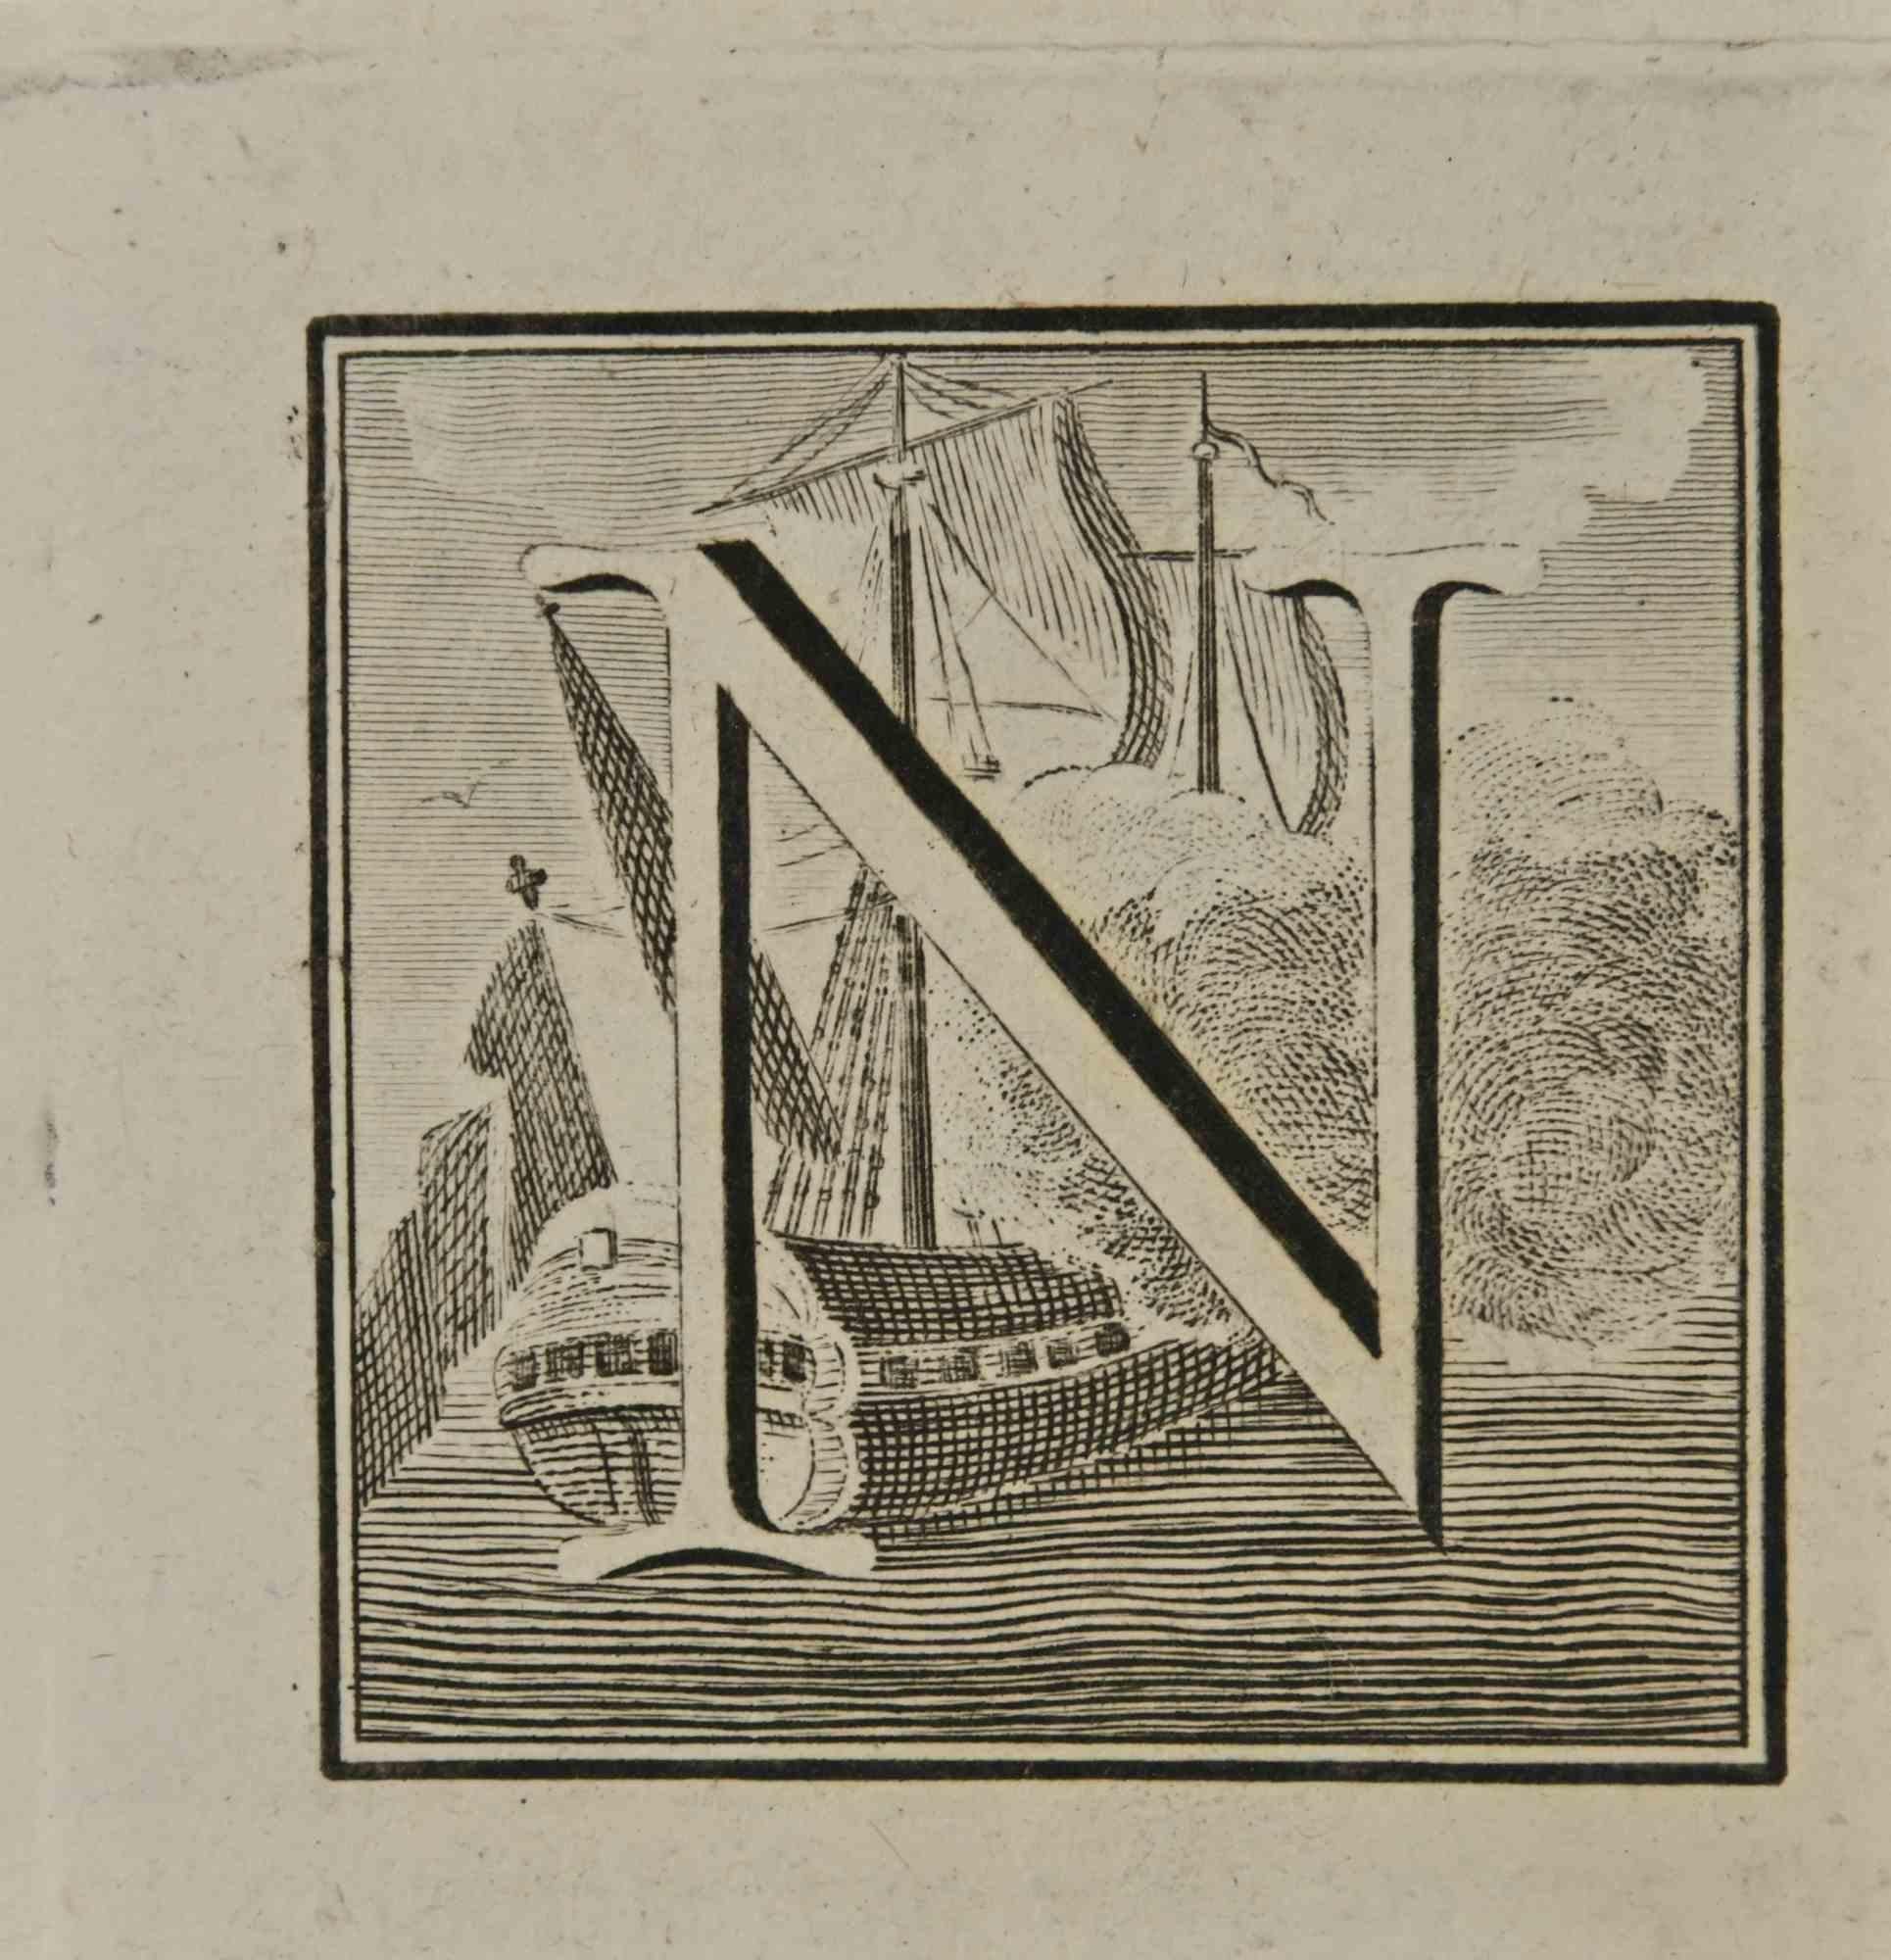 Letter of the Alphabet N,  from the series "Antiquities of Herculaneum", is an etching on paper realized by Luigi Vanvitelli in the 18th century.

Good conditions.

The etching belongs to the print suite “Antiquities of Herculaneum Exposed”